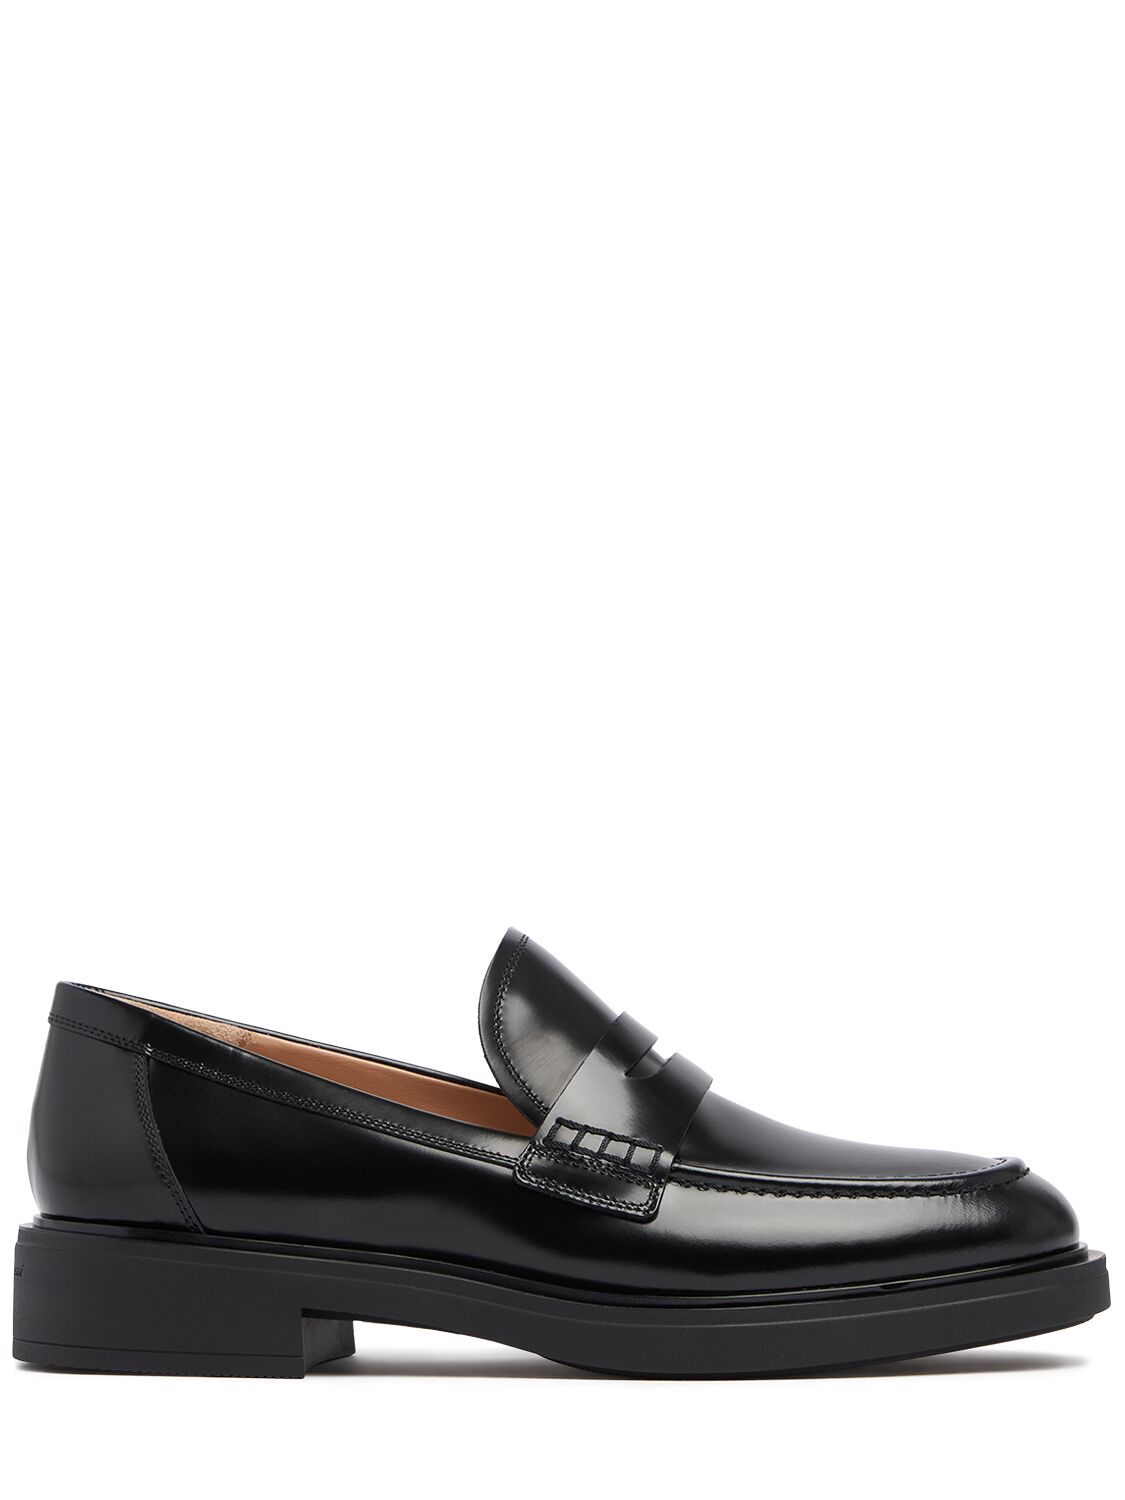 Gianvito Rossi 20mm Harris Leather Penny Loafers In Black